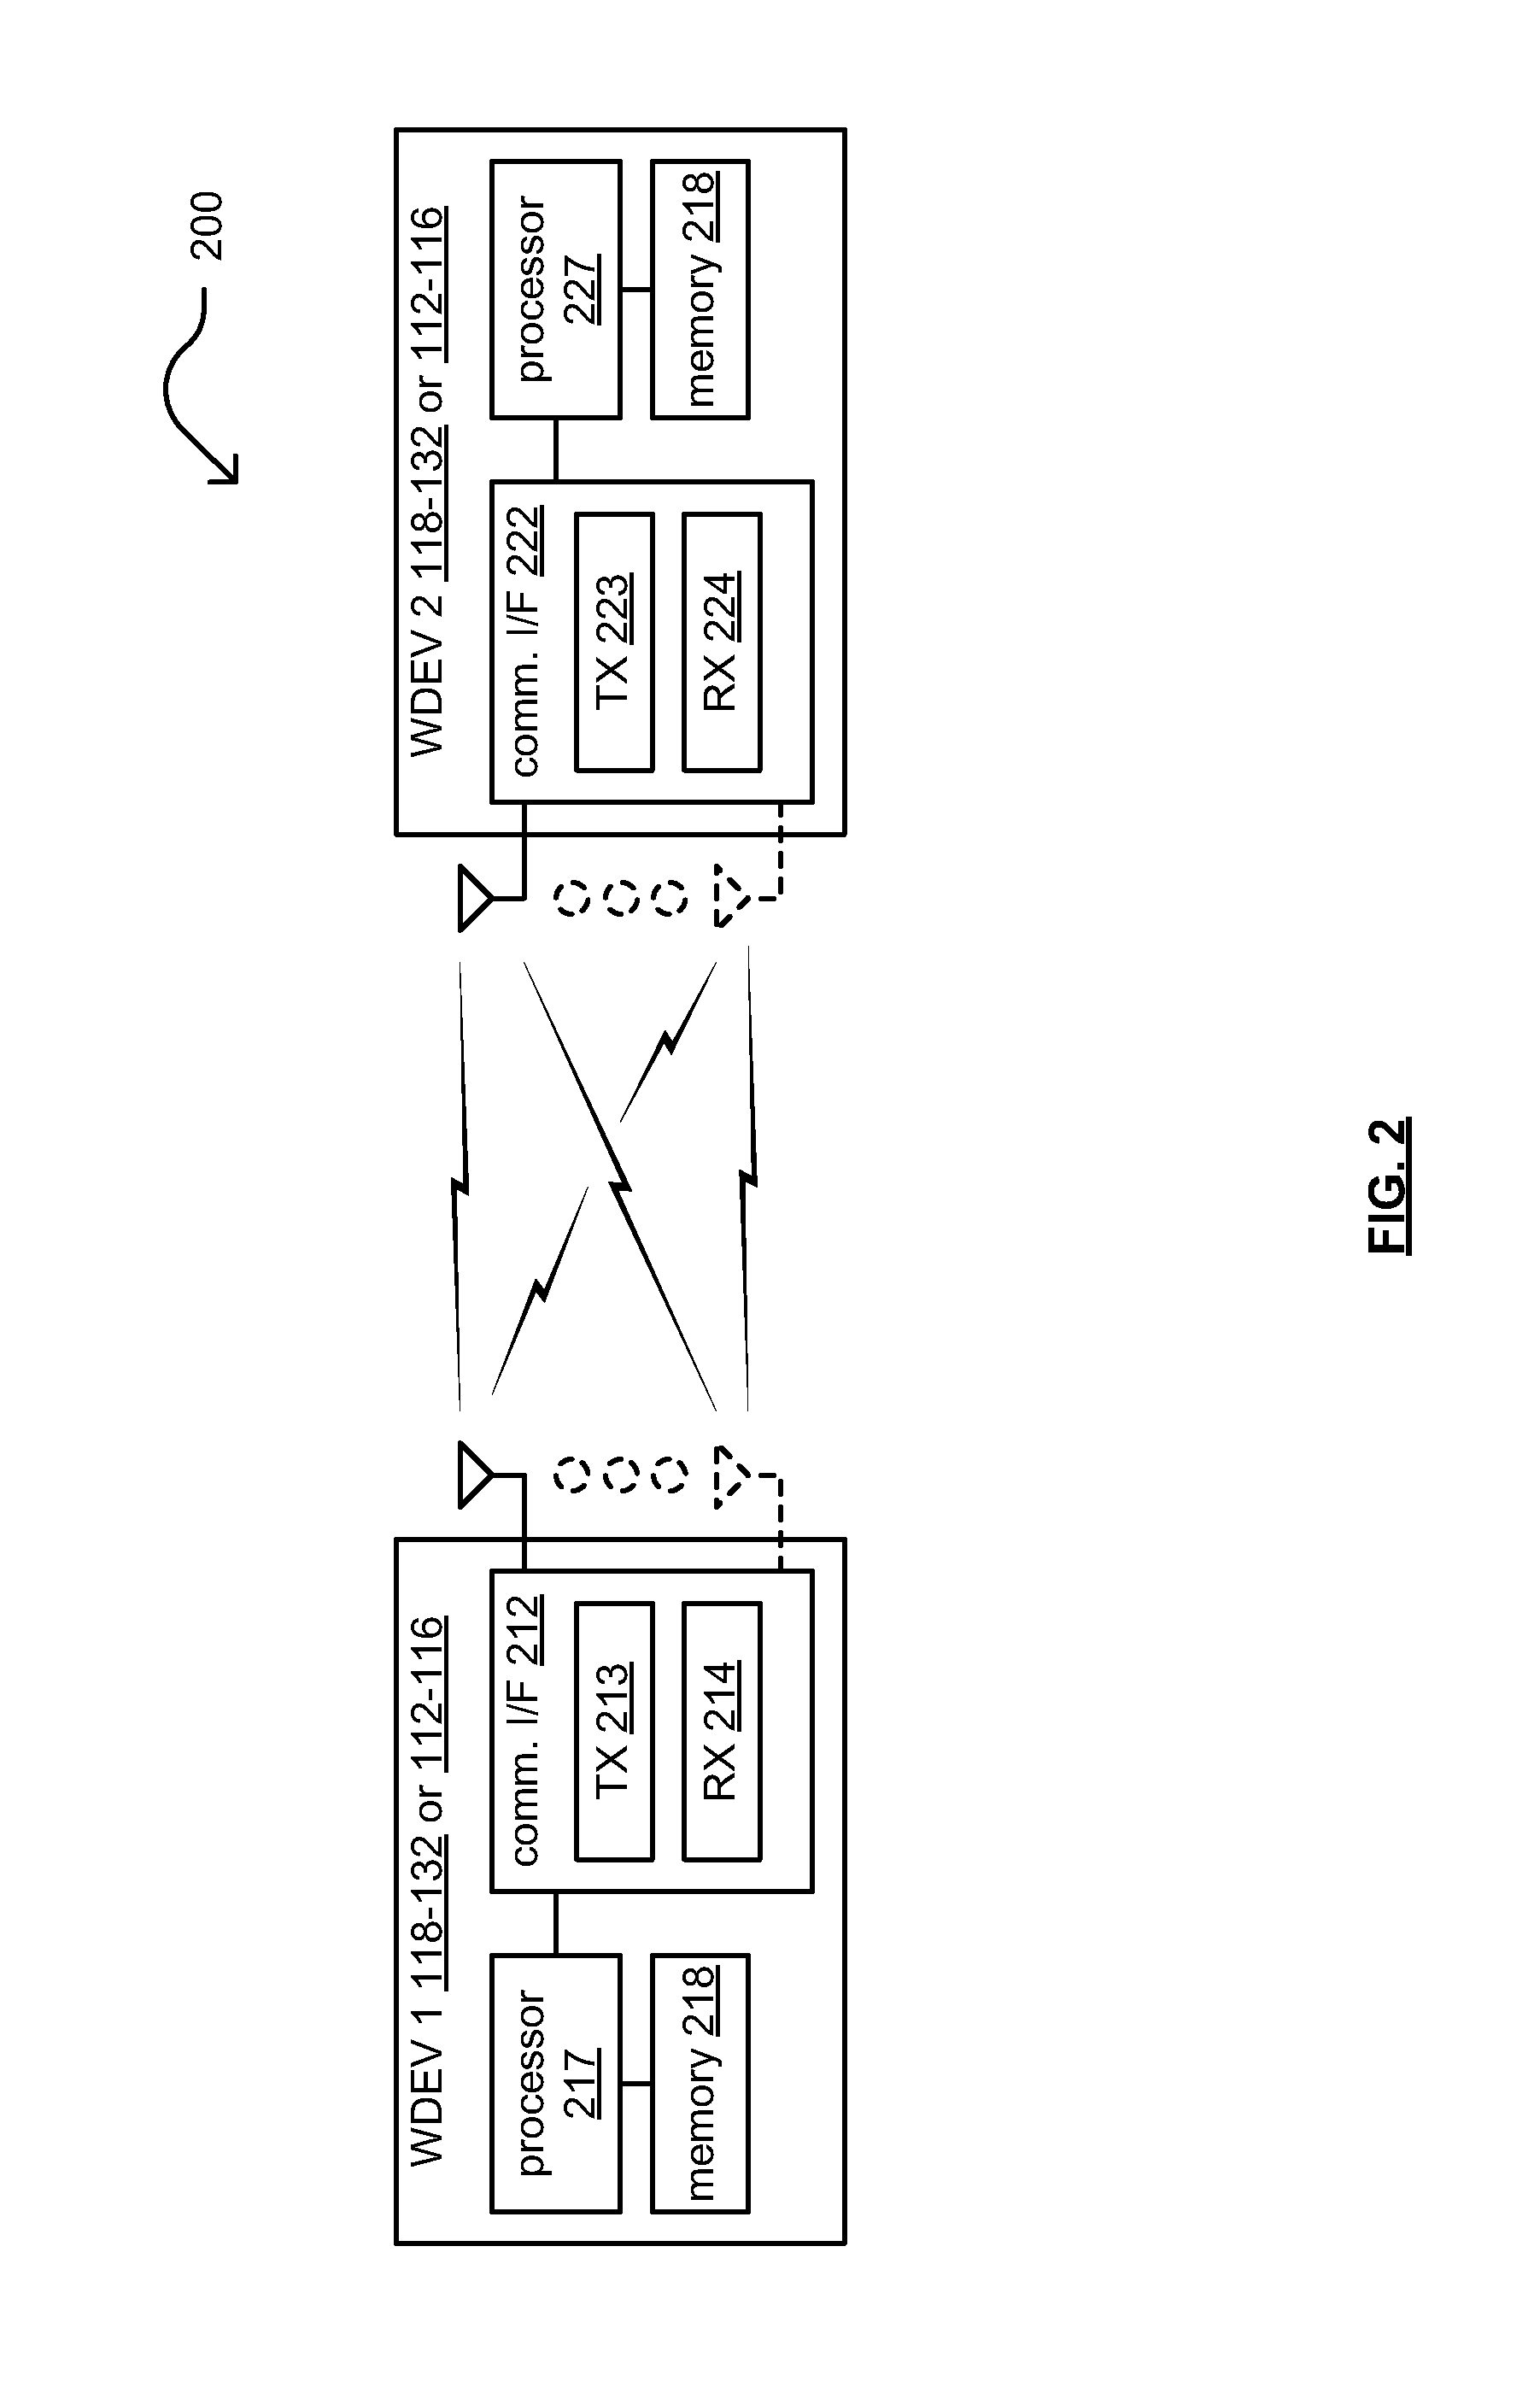 Probe request for relay discovery within single user, multiple user, multiple access, and/or MIMO wireless communications